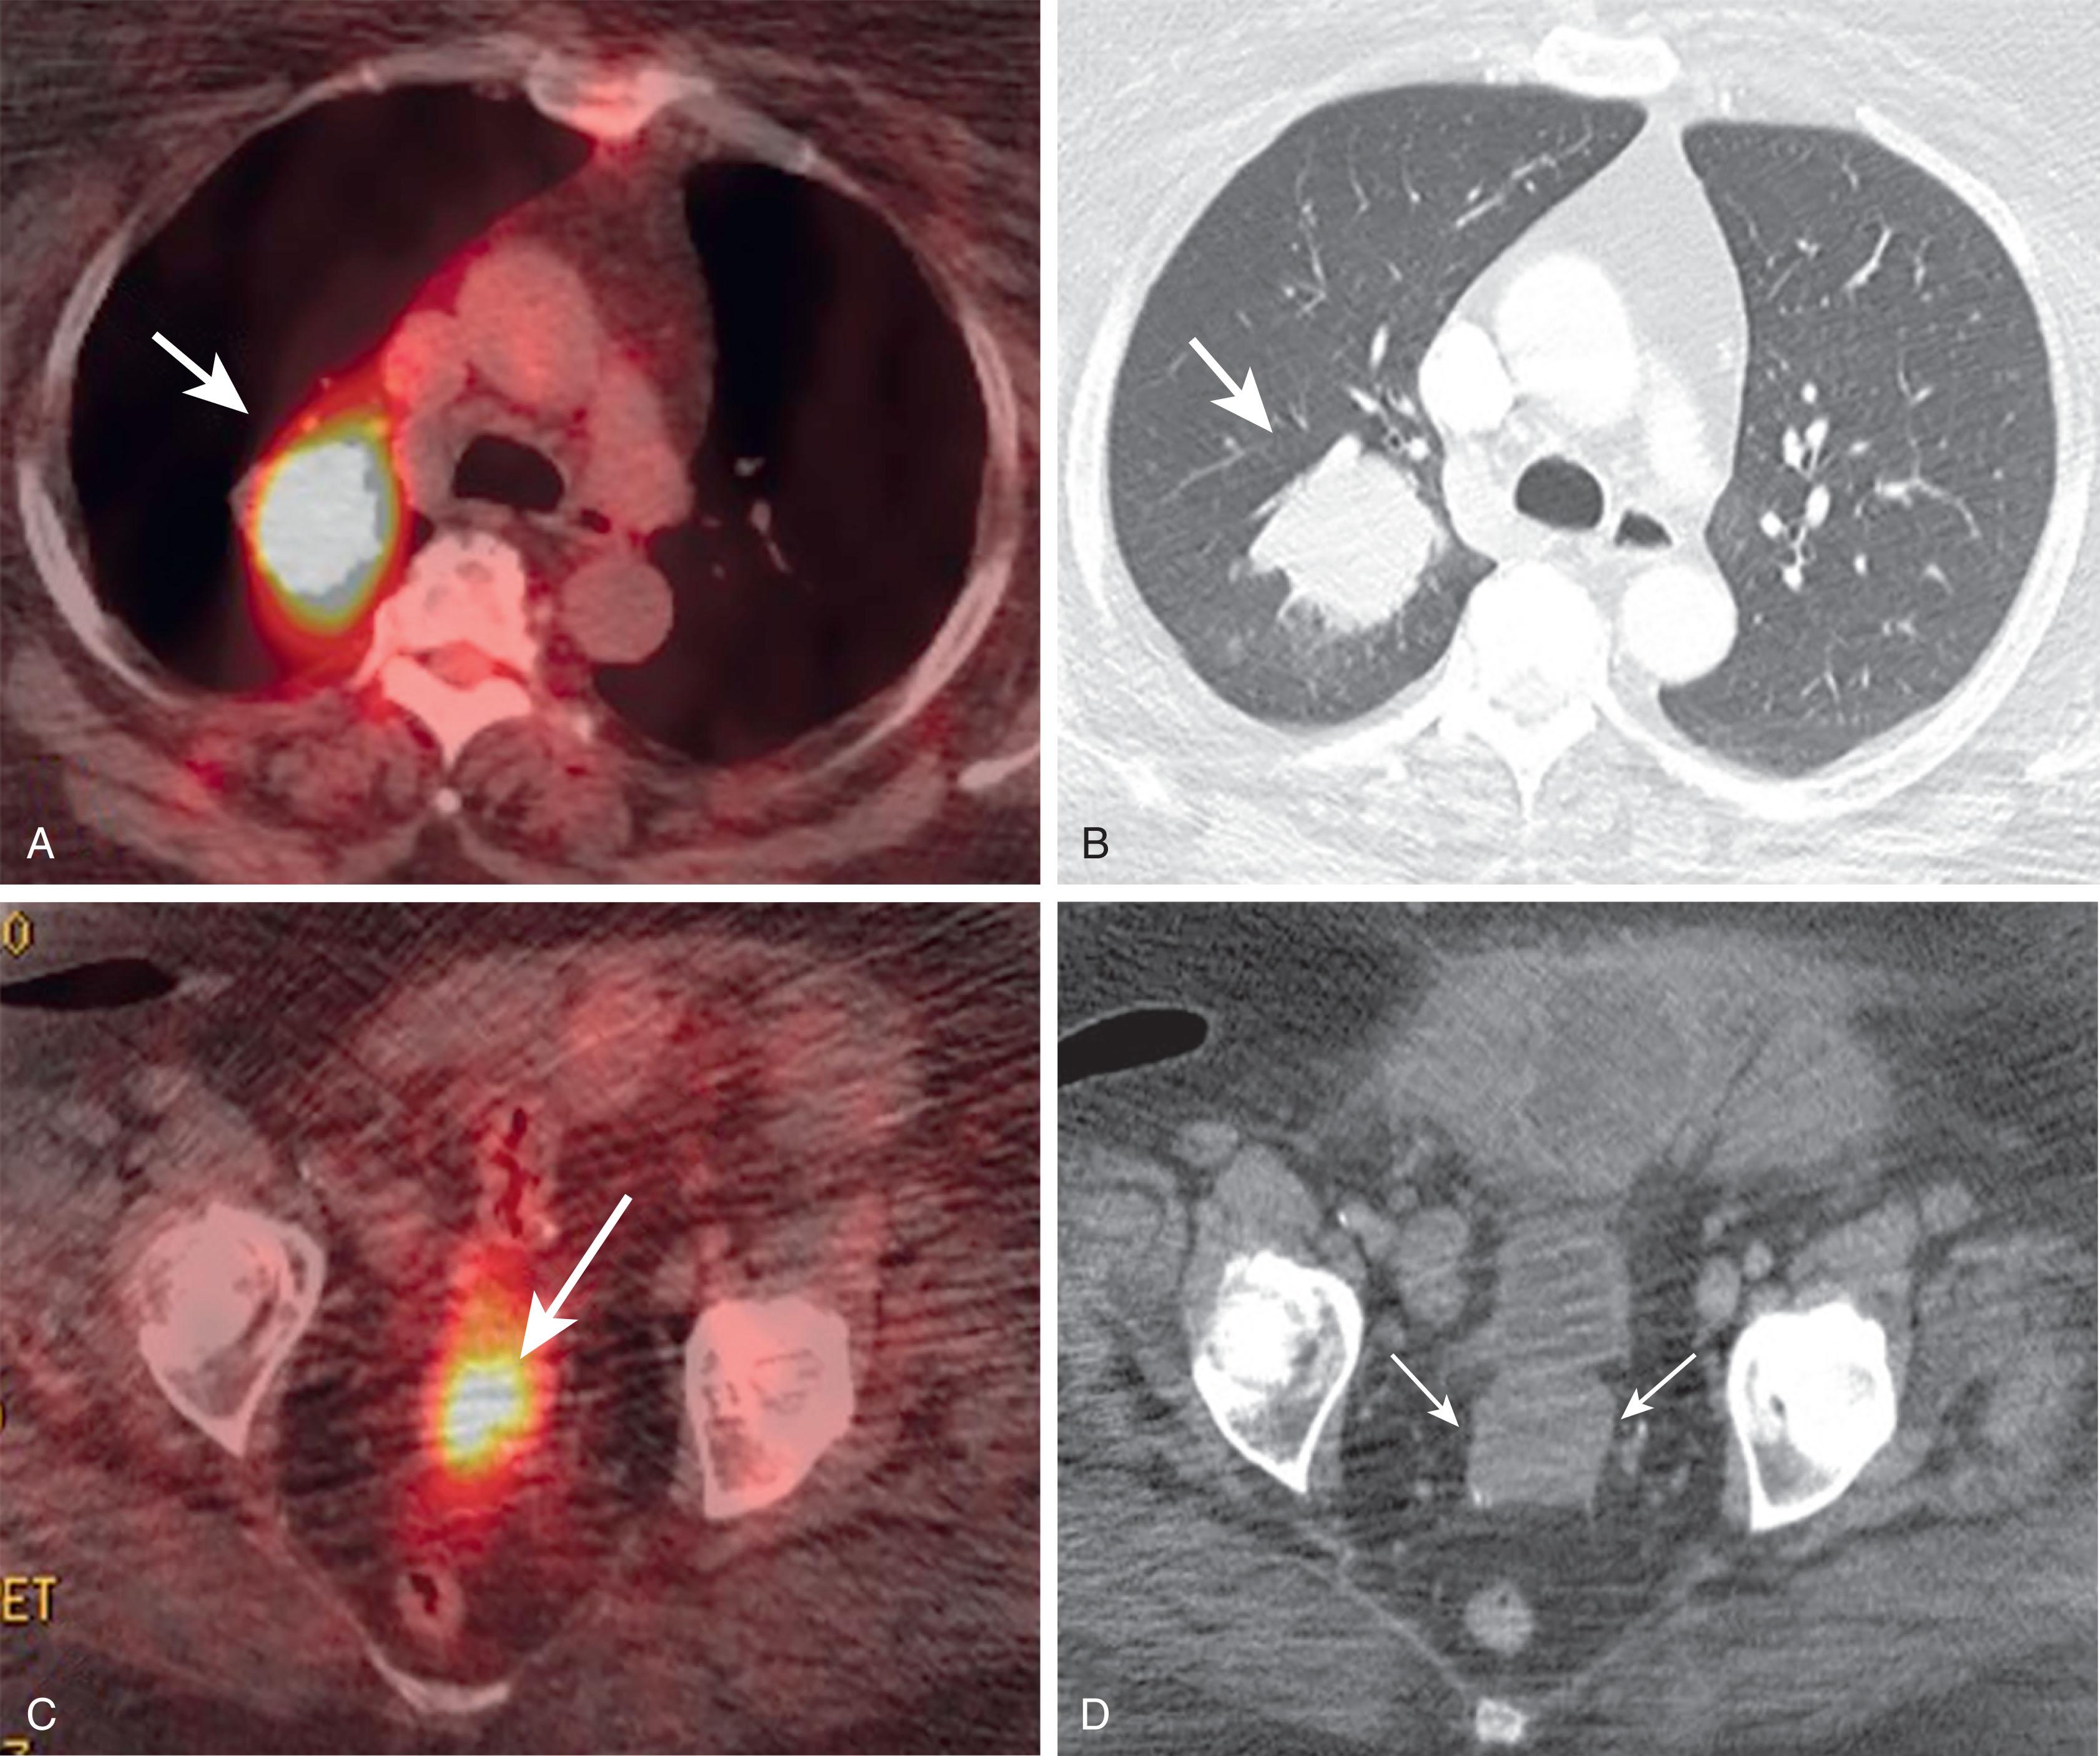 Fig. 25.9, A 61-year-old woman with prior history of endometrial carcinoma, status posthysterectomy, now presenting with abnormal vaginal bleeding, suspicious for recurrence. A solid mass at the apex of the vaginal cuff was found on clinical examination. A , 2-[ 18 F] fluoro-2-deoxy-D-glucose positron emission tomography (PET)/computed tomography (CT) demonstrates a hypermetabolic right upper lobe lung mass ( white arrow ), consistent with metastatic disease. B , CT with lung windows demonstrates the right upper lobe metastasis ( white arrow ). C , PET/CT scan shows a focal area of increased metabolic activity in the vaginal cuff, consistent with recurrent disease ( white arrow ). D , Contrast-enhanced CT scan delineates the solid mass (white arrows) at the apex of the vaginal cuff.